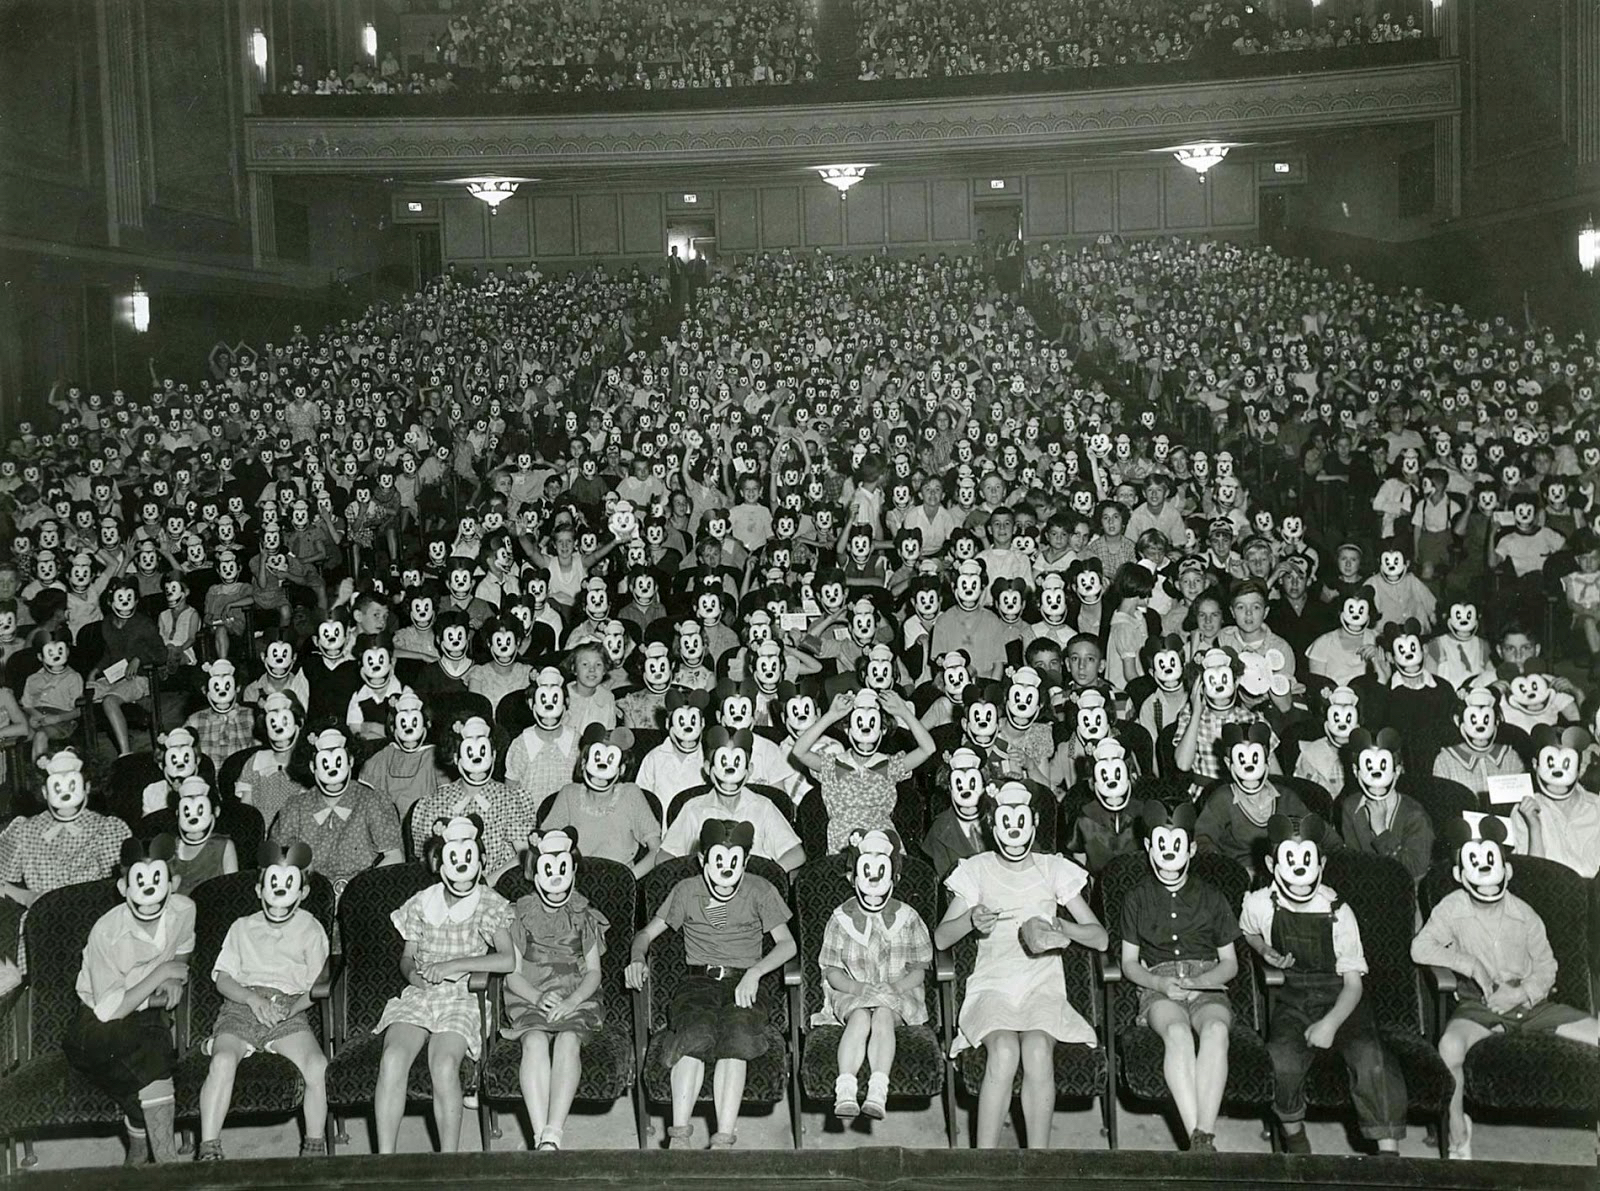 mickey mouse club 1930s - @ Vo @ 984 Ss